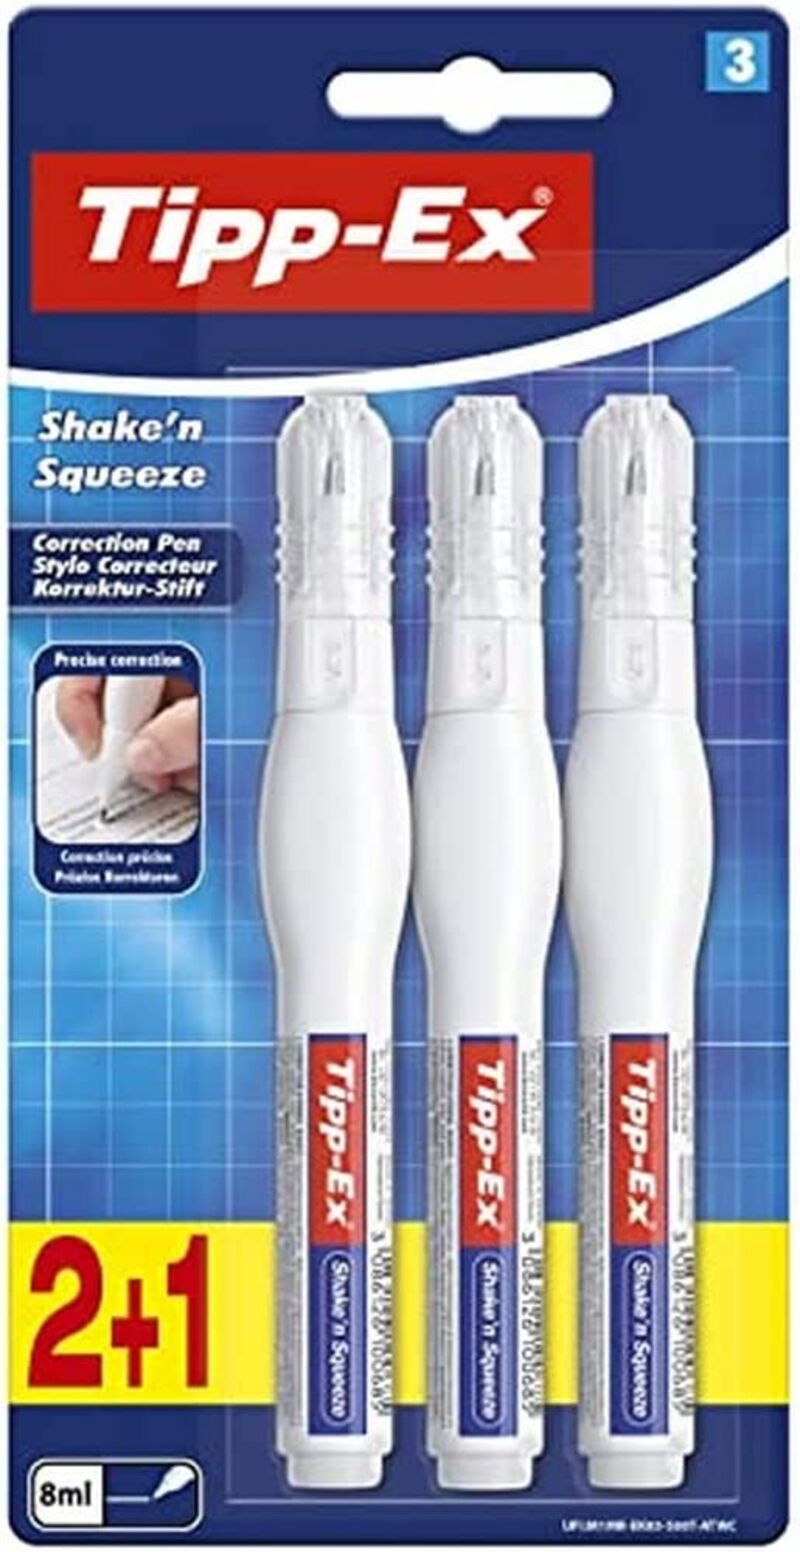 blister shake n squeeze bl2+1 isp eu - 8349871